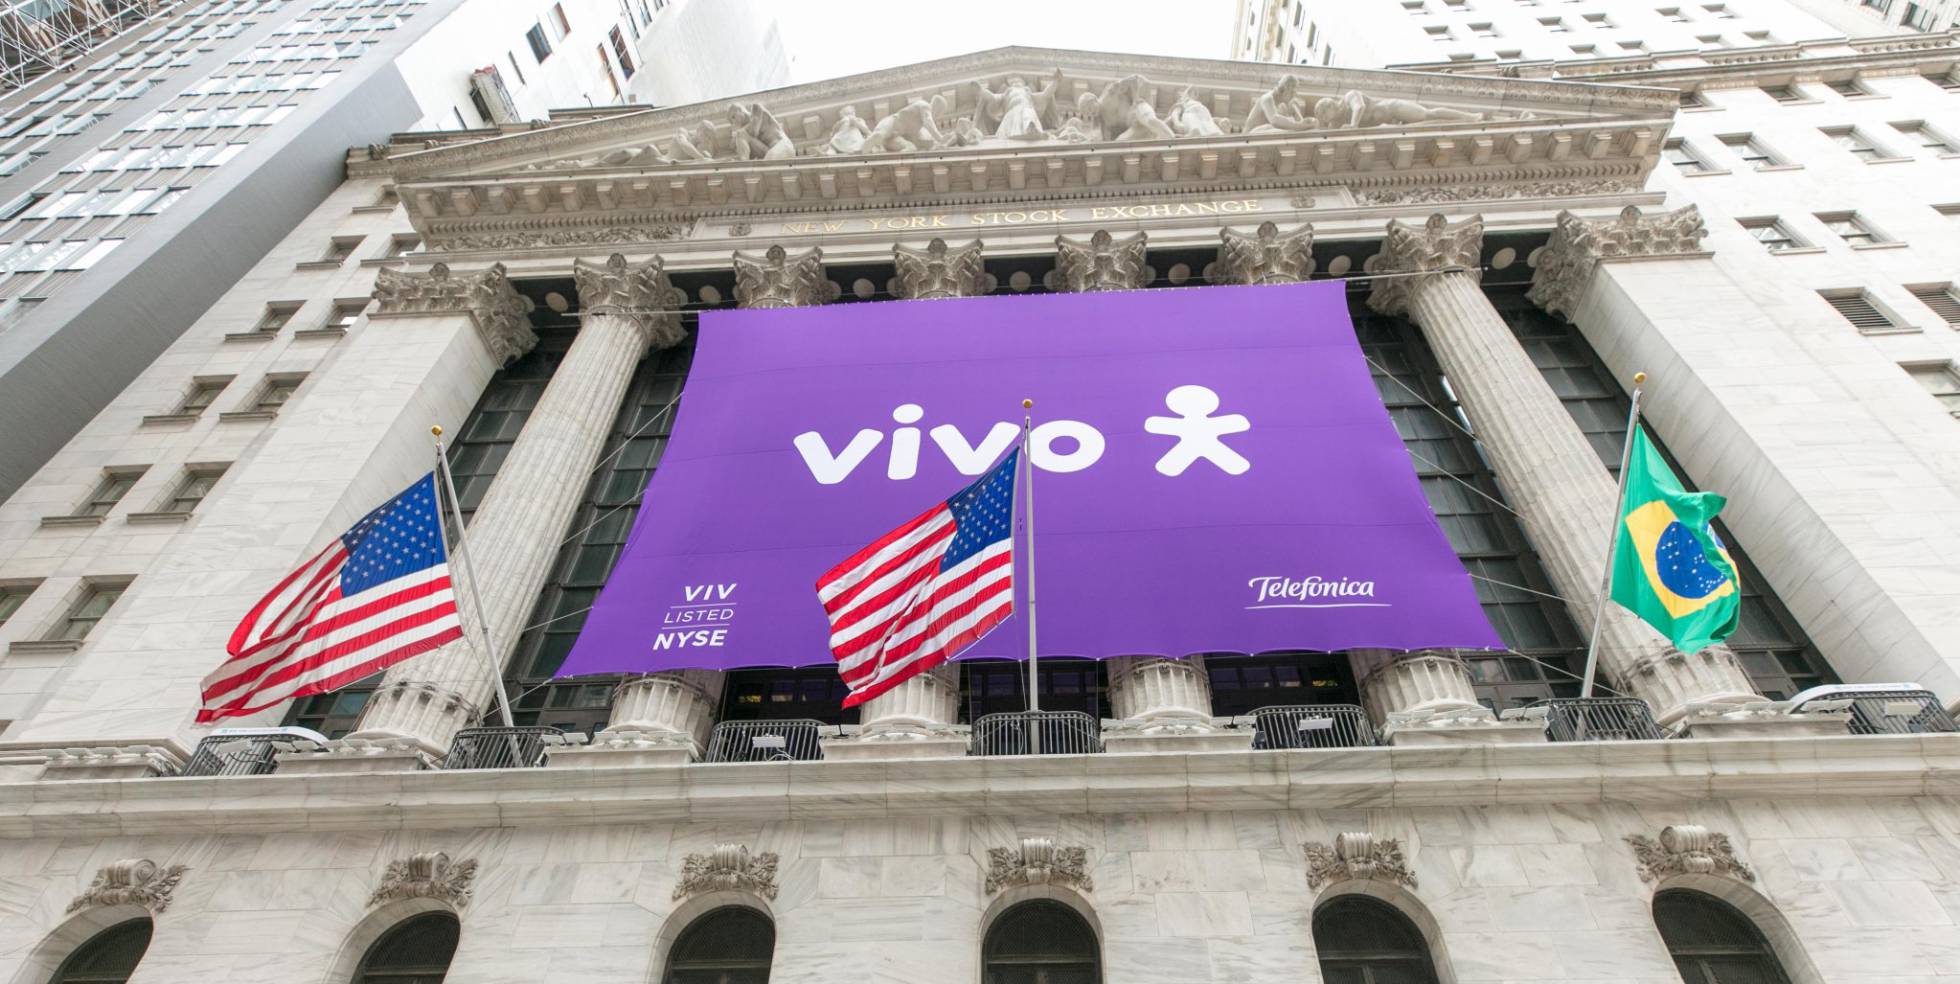 In 2018, Vivo celebrated 20 years in the list of the New York Stock Exchange.